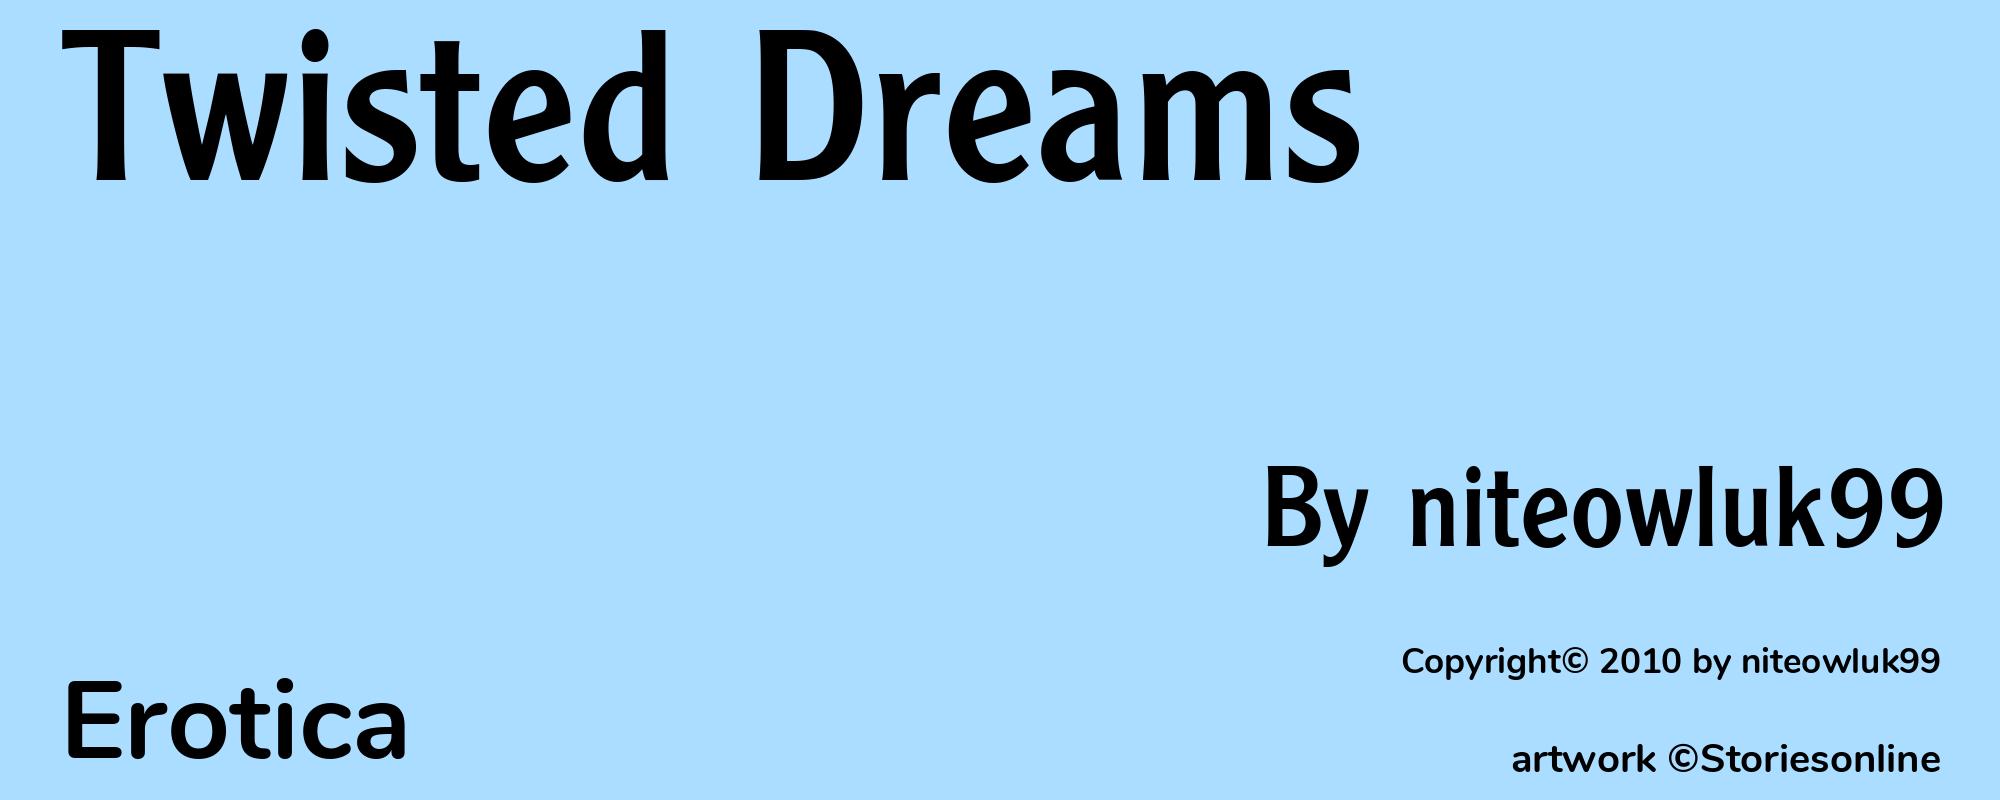 Twisted Dreams - Cover